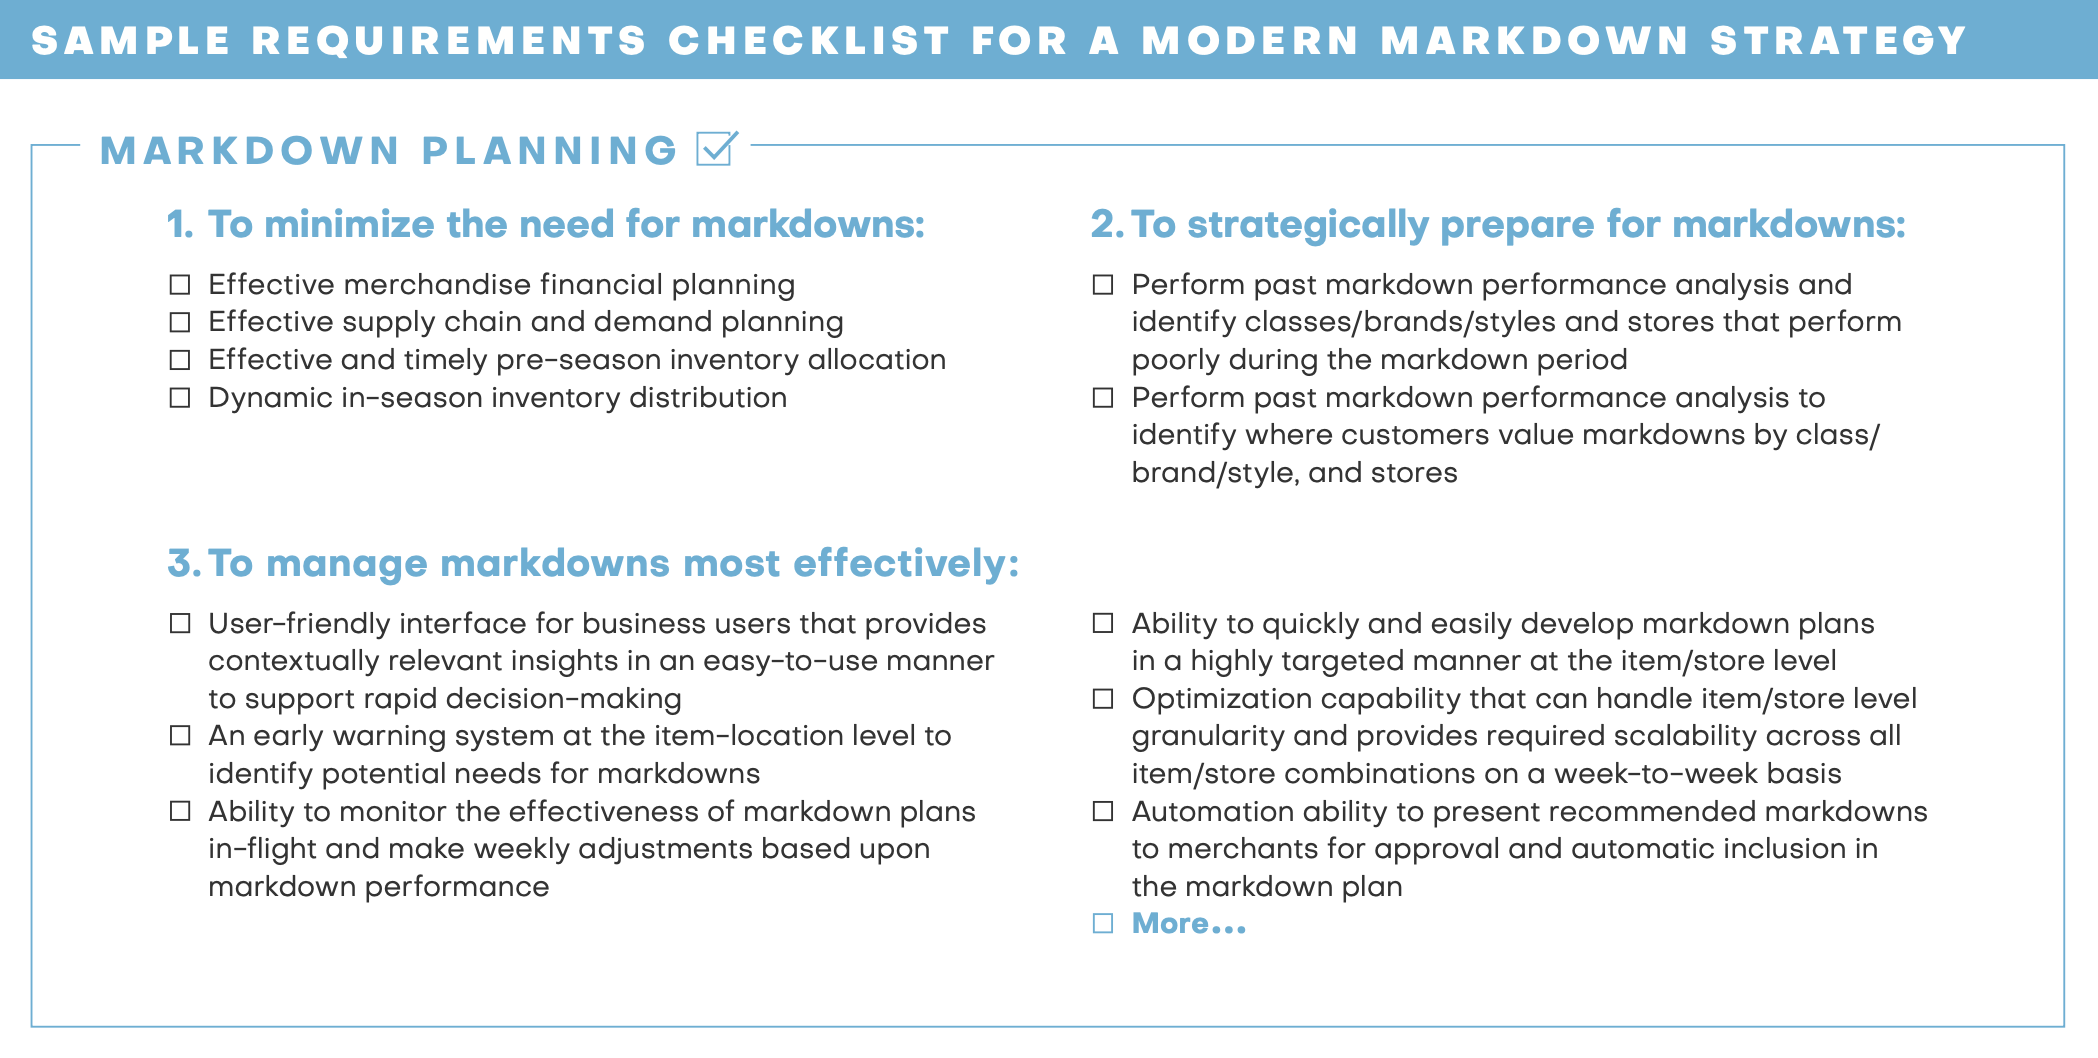 Requirements Checklist for Markdown Strategy